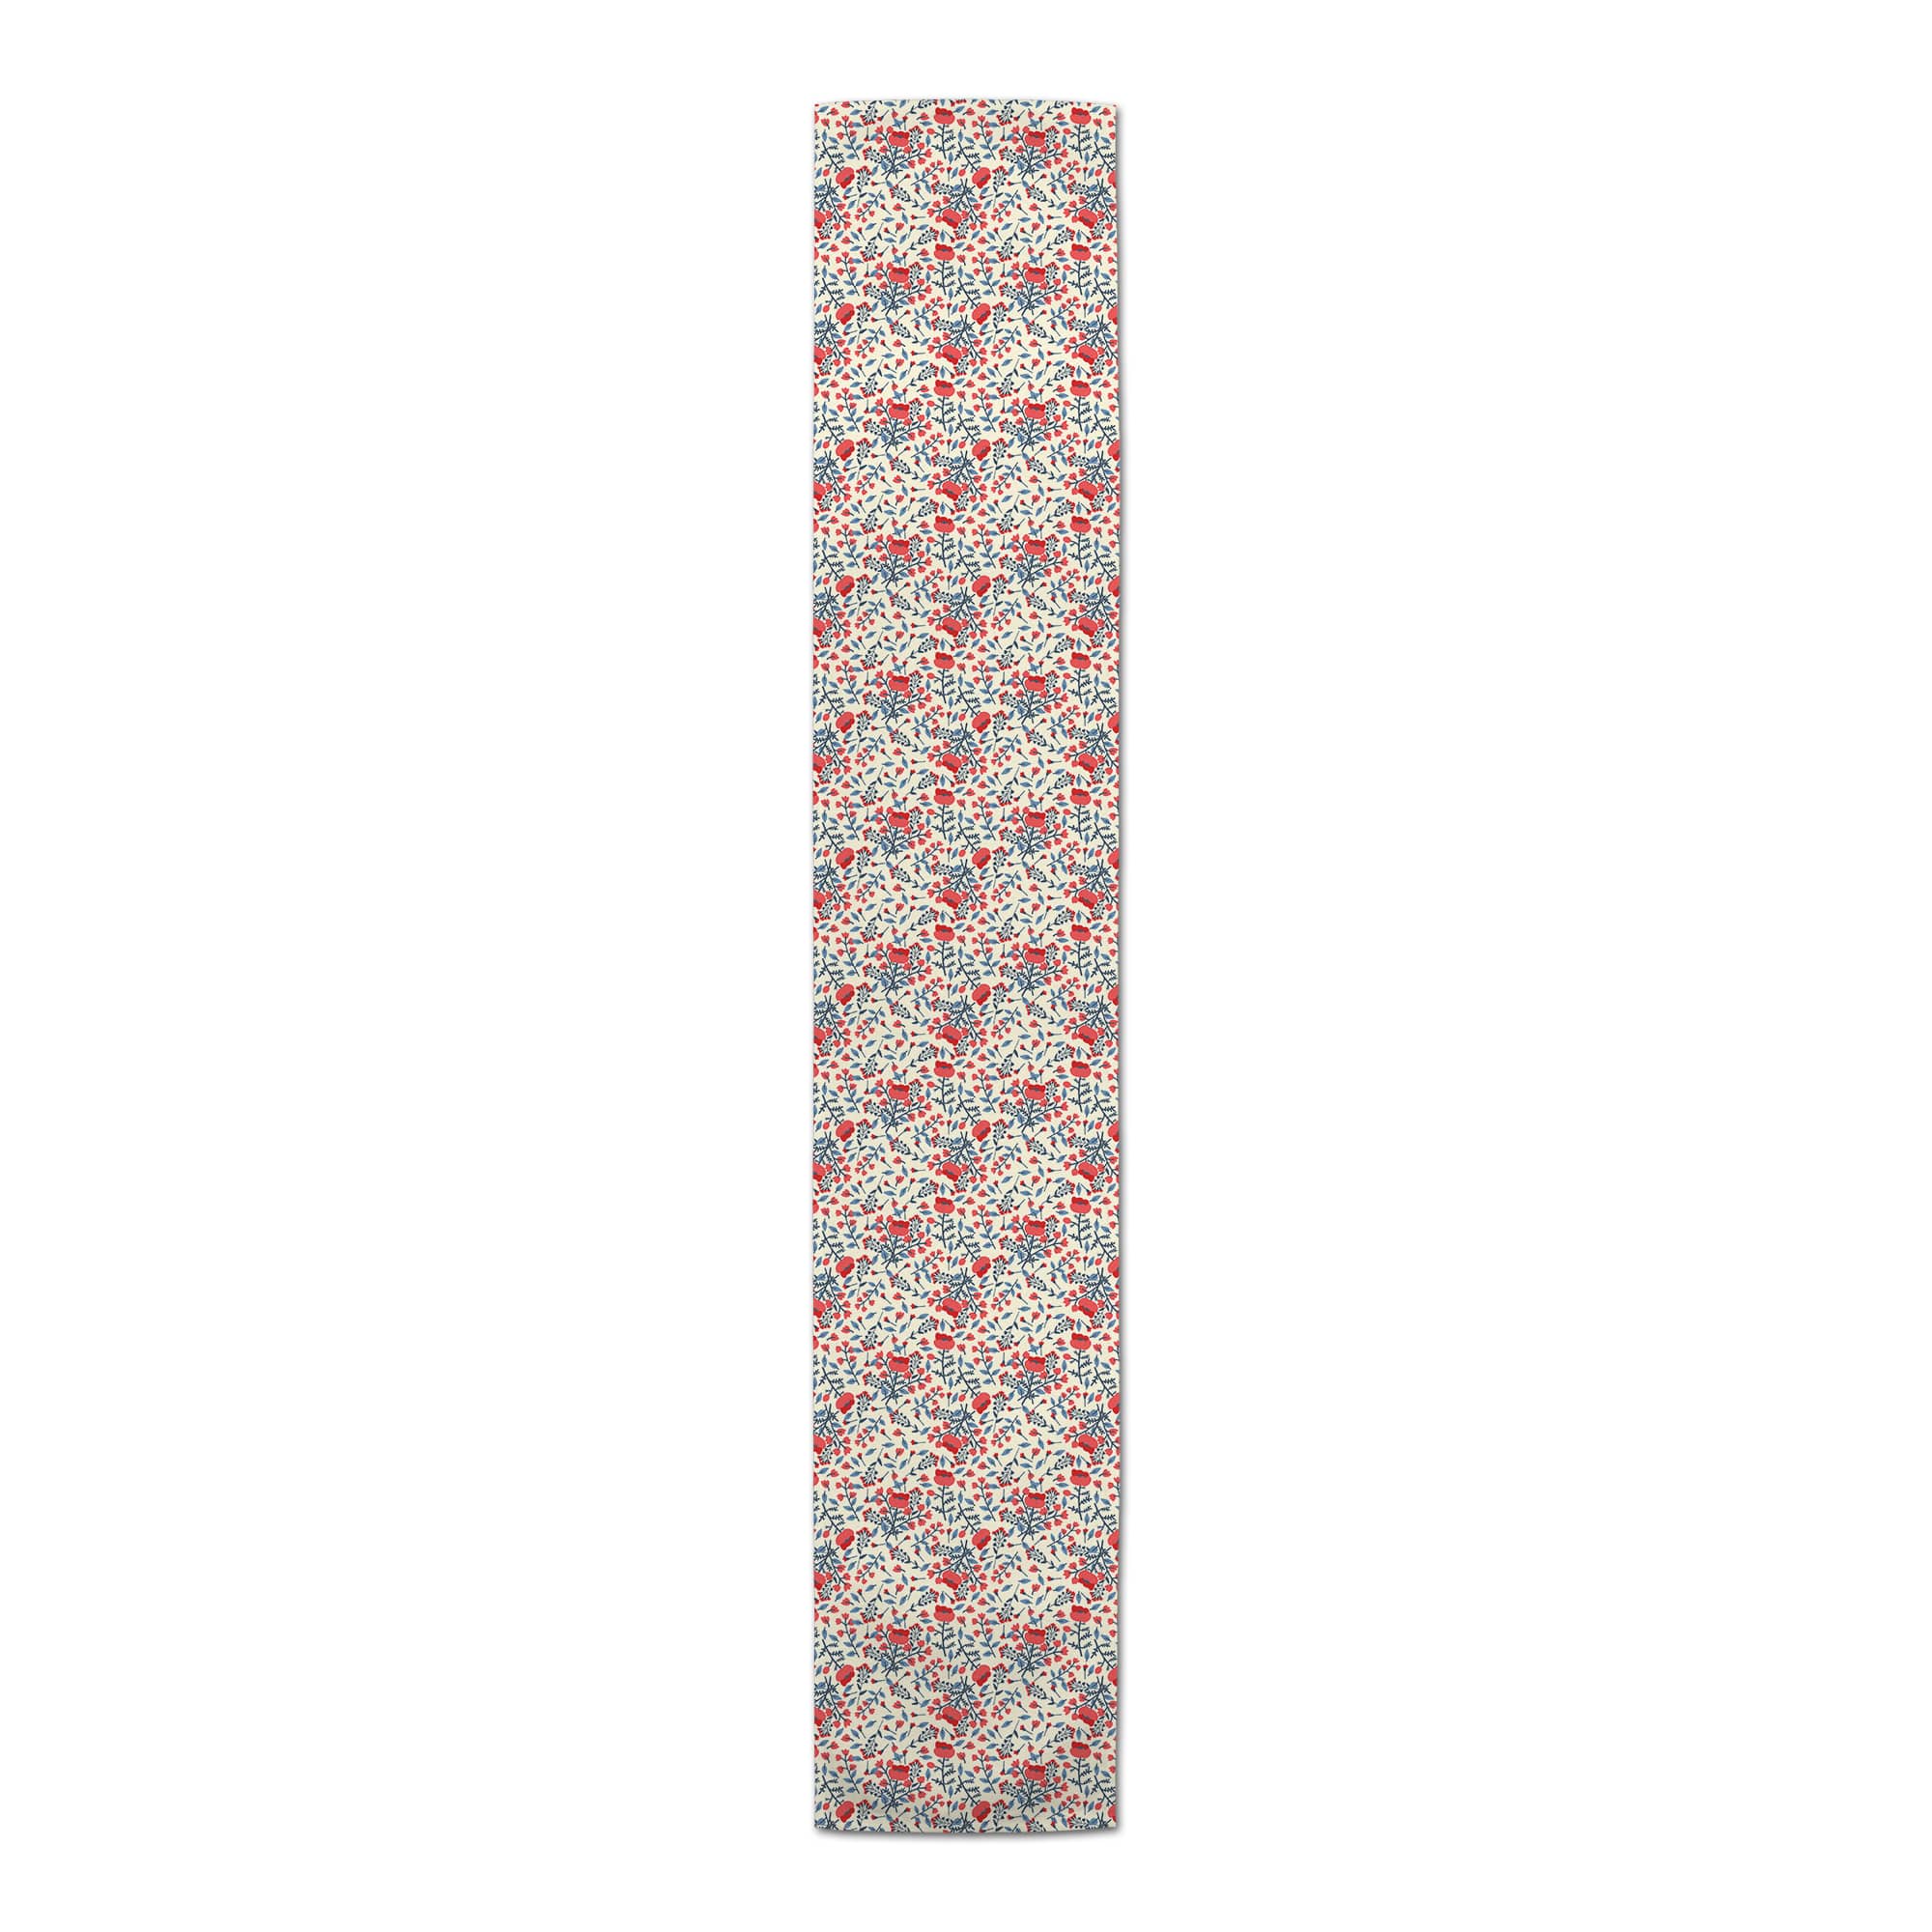 Patriotic Florals Poly Twill Table Runner